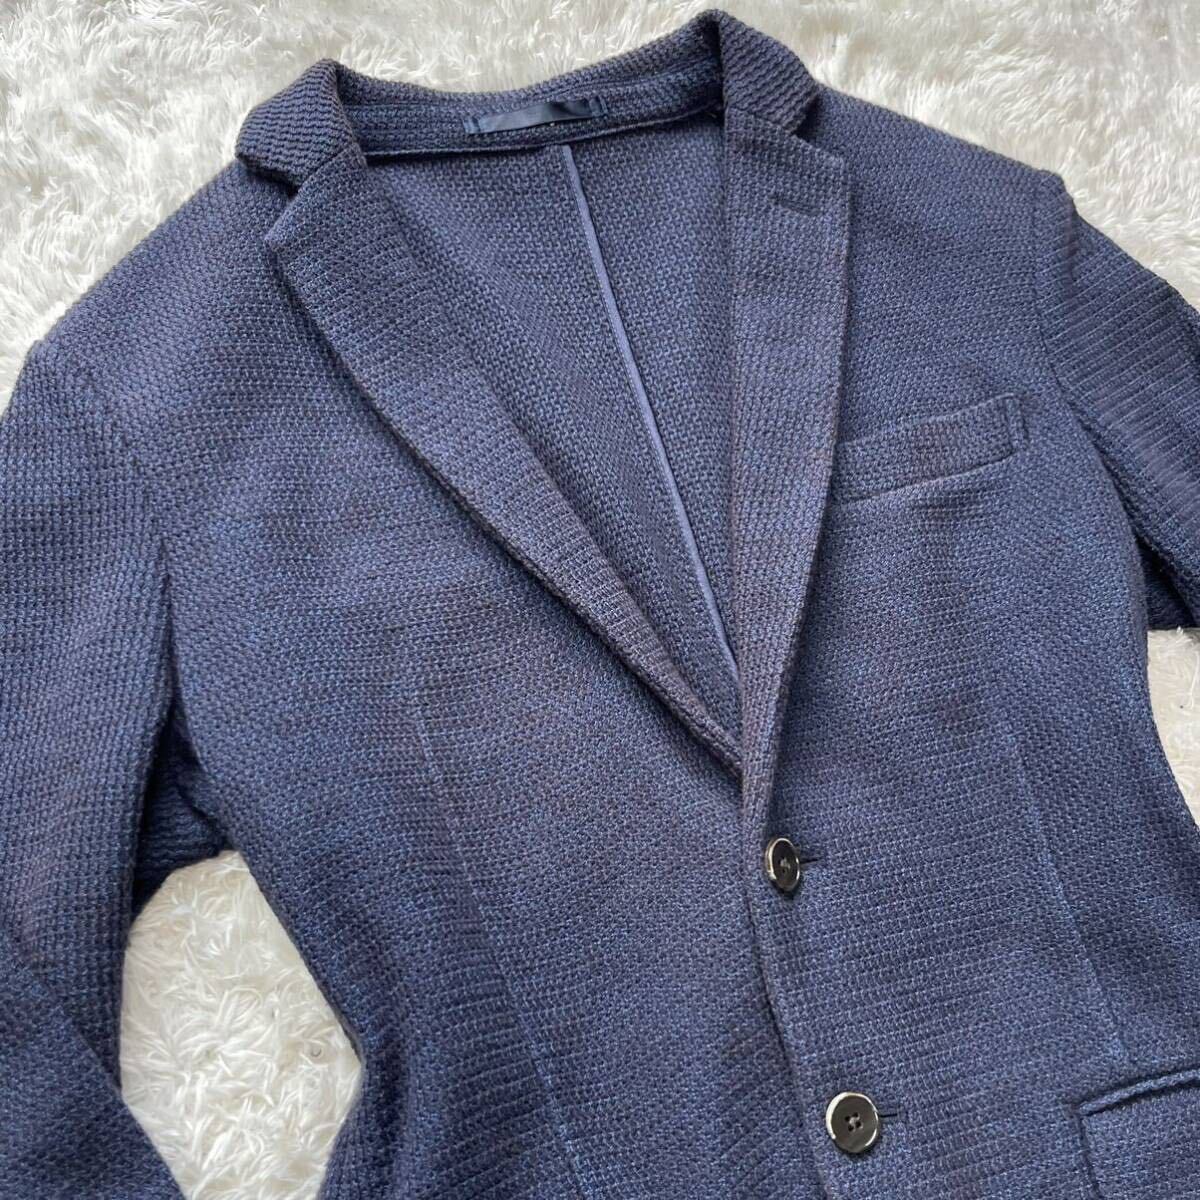  ultimate beautiful goods rare M~L corresponding United Arrows UNITED ARROWS tailored jacket knitted stretch navy navy blue 2B largish gradation 